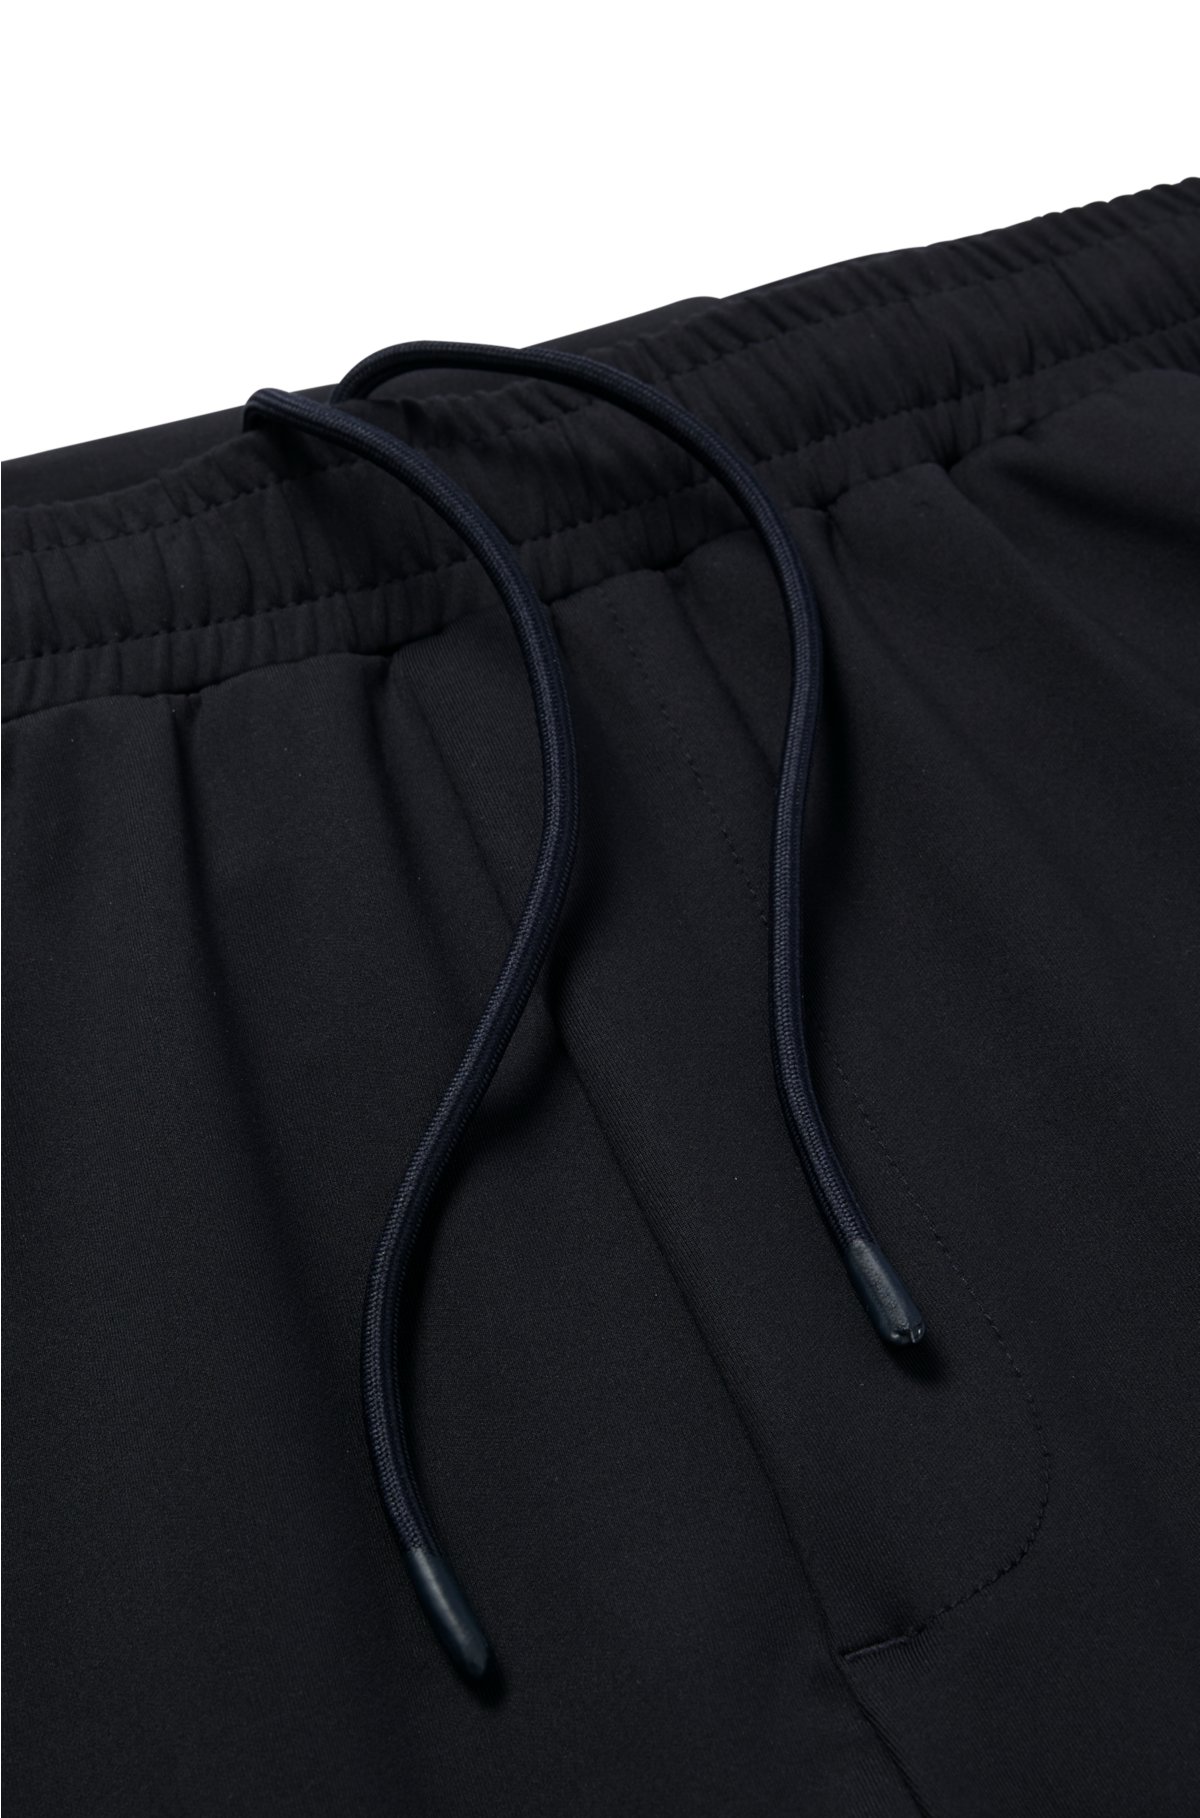  iCODOD Tracksuit Bottoms Unisex Stretch Active Quick